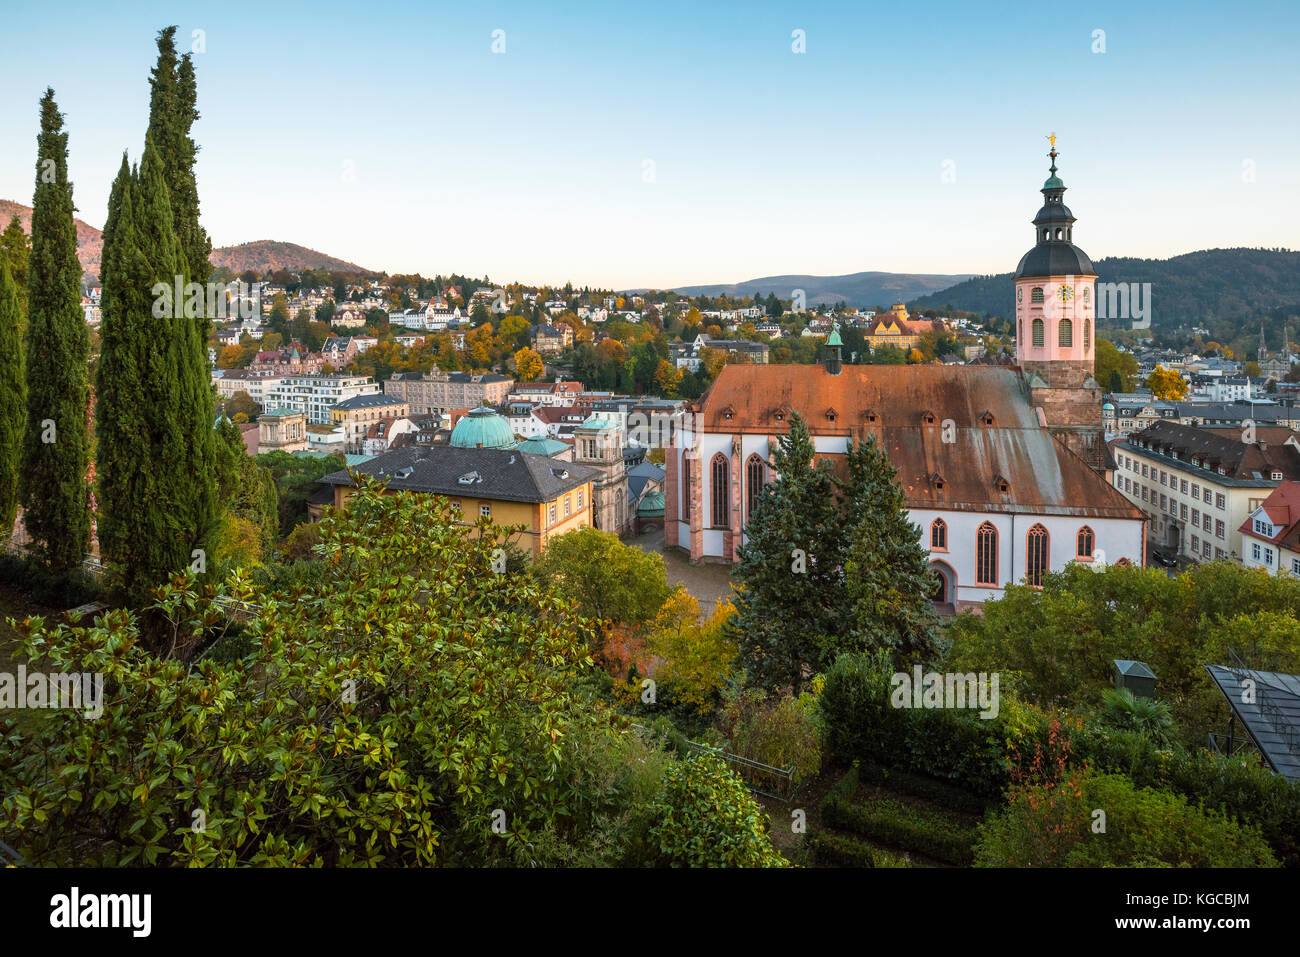 panorama view over the town at the New Castle, spa town Baden-Baden at sunset, Germany Stock Photo